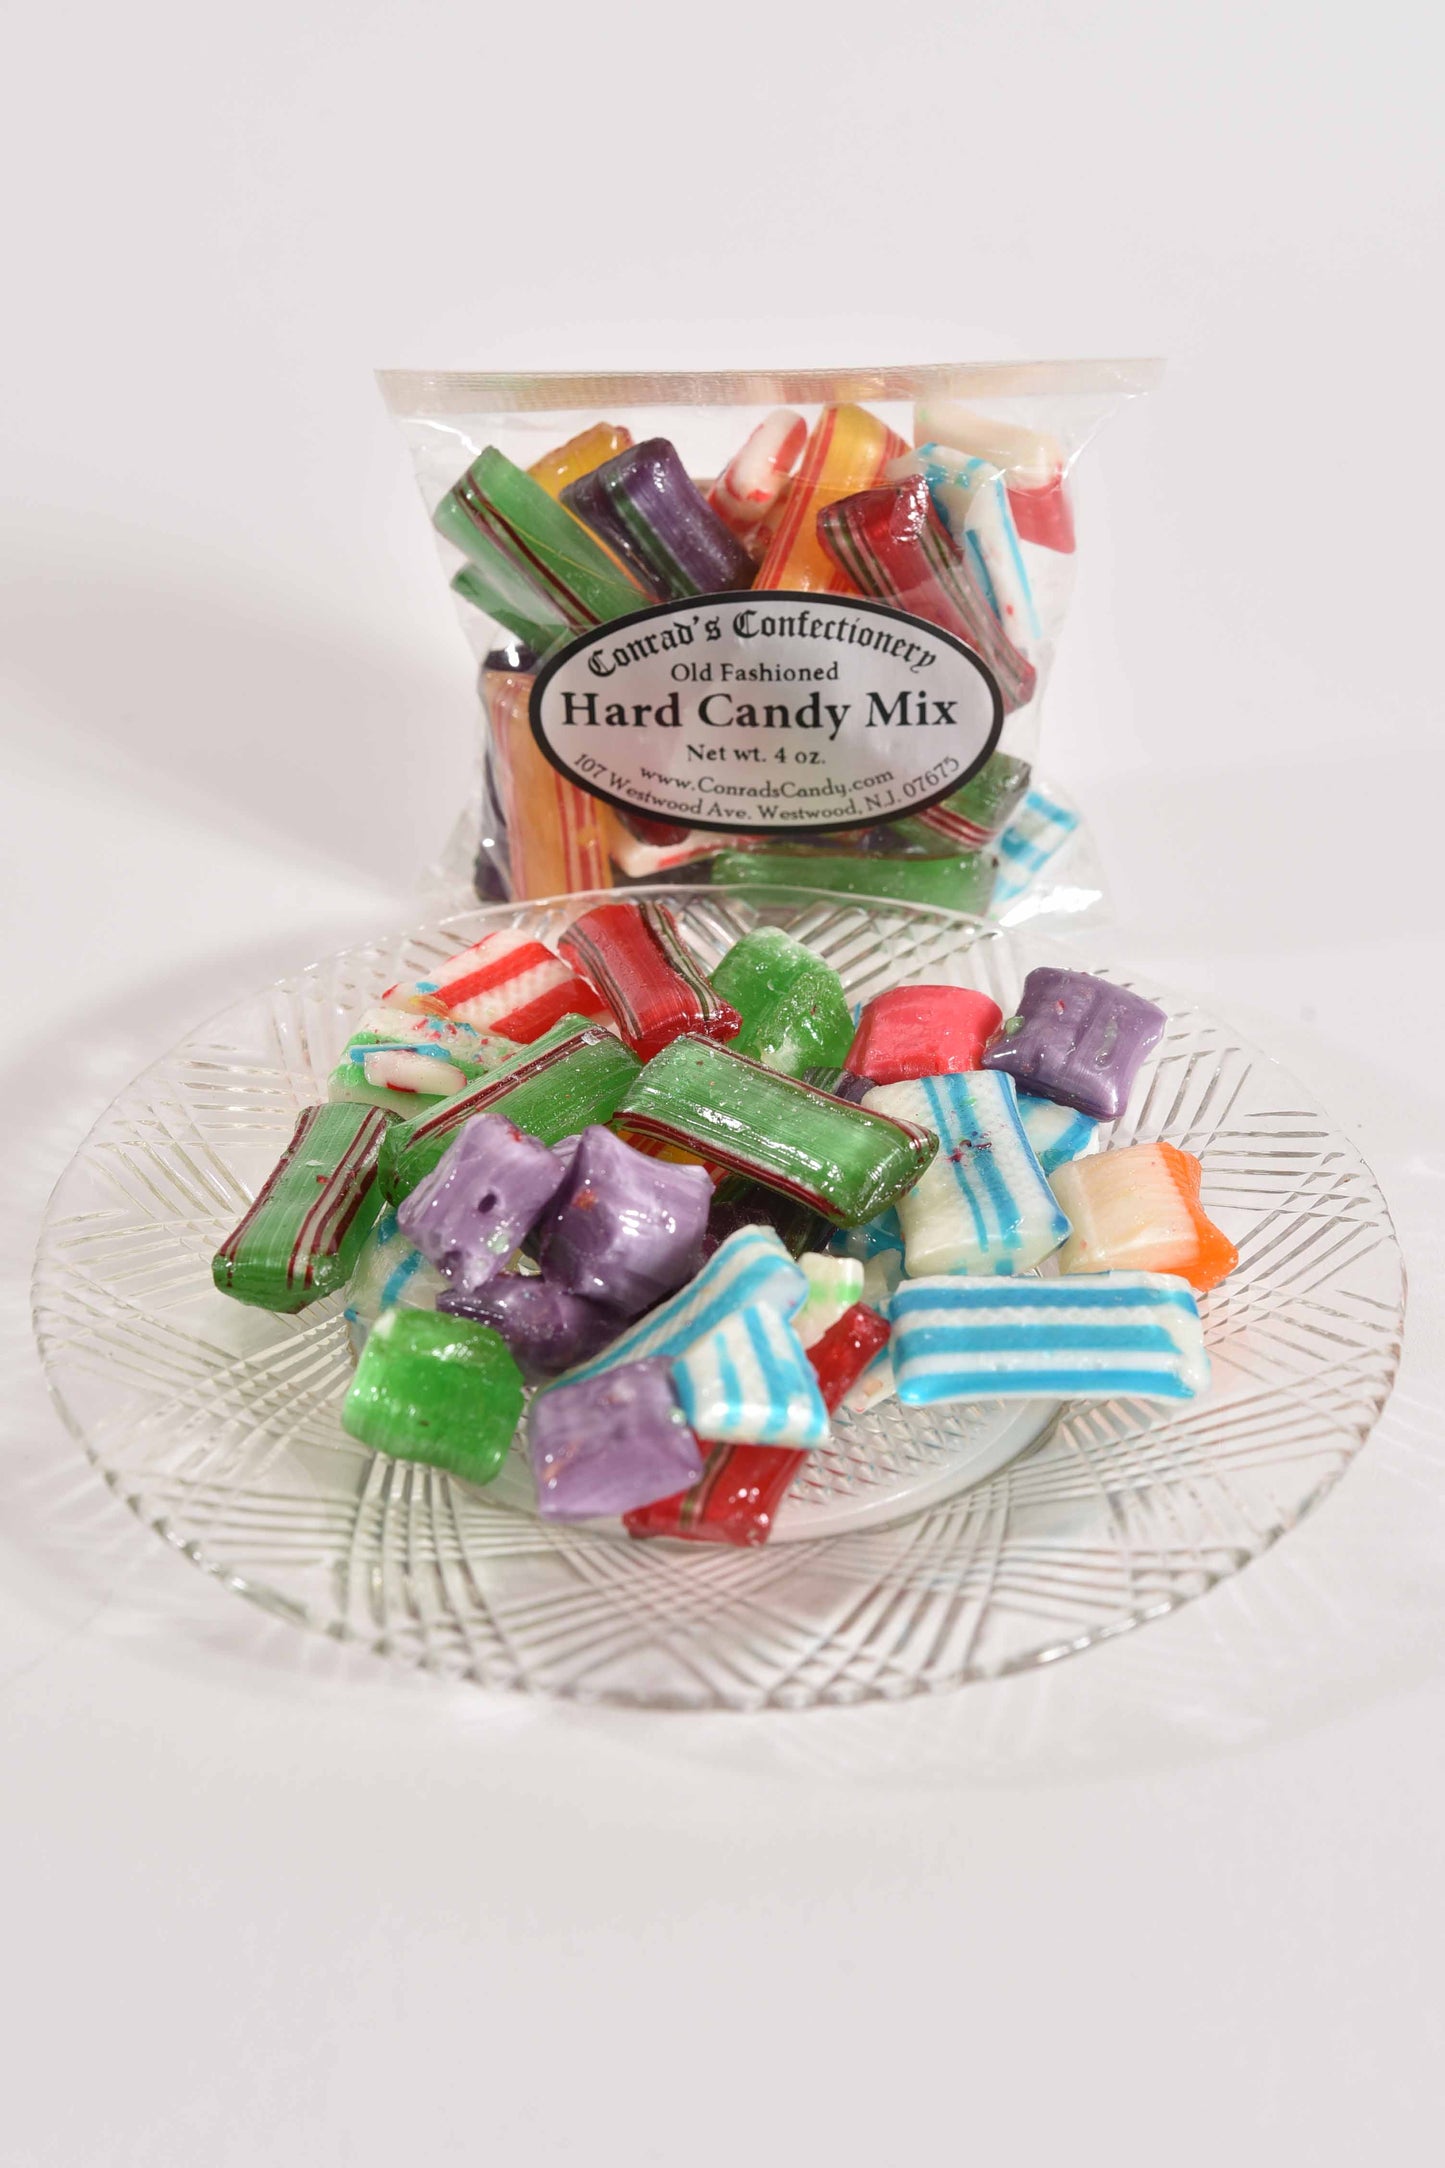 Old Fashioned Hard Candy Mix (4oz) - Conrad's Confectionery